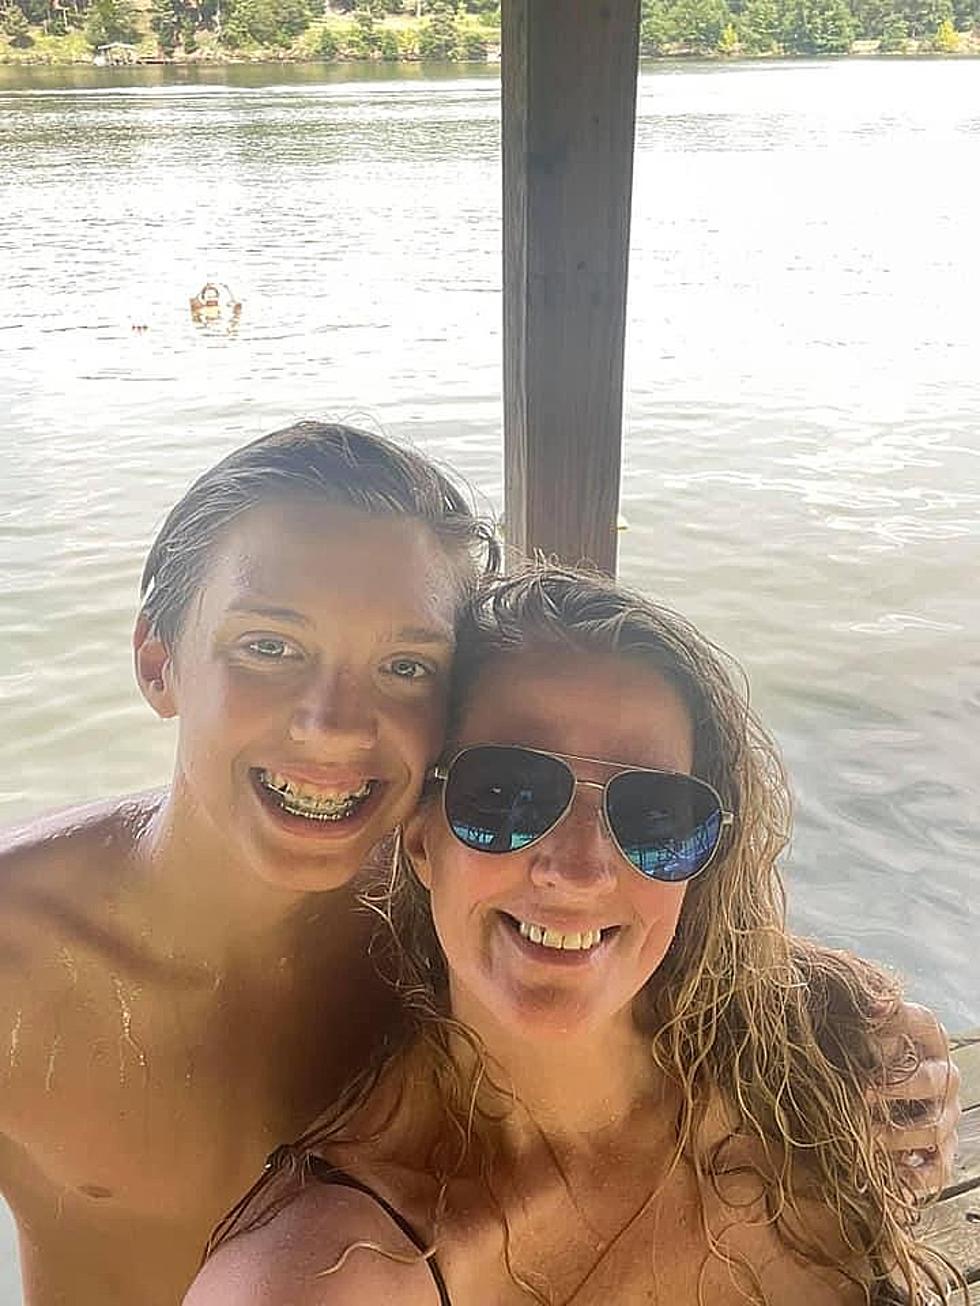 Creepy Image Appears in Selfie from Lake Tuscaloosa in Alabama